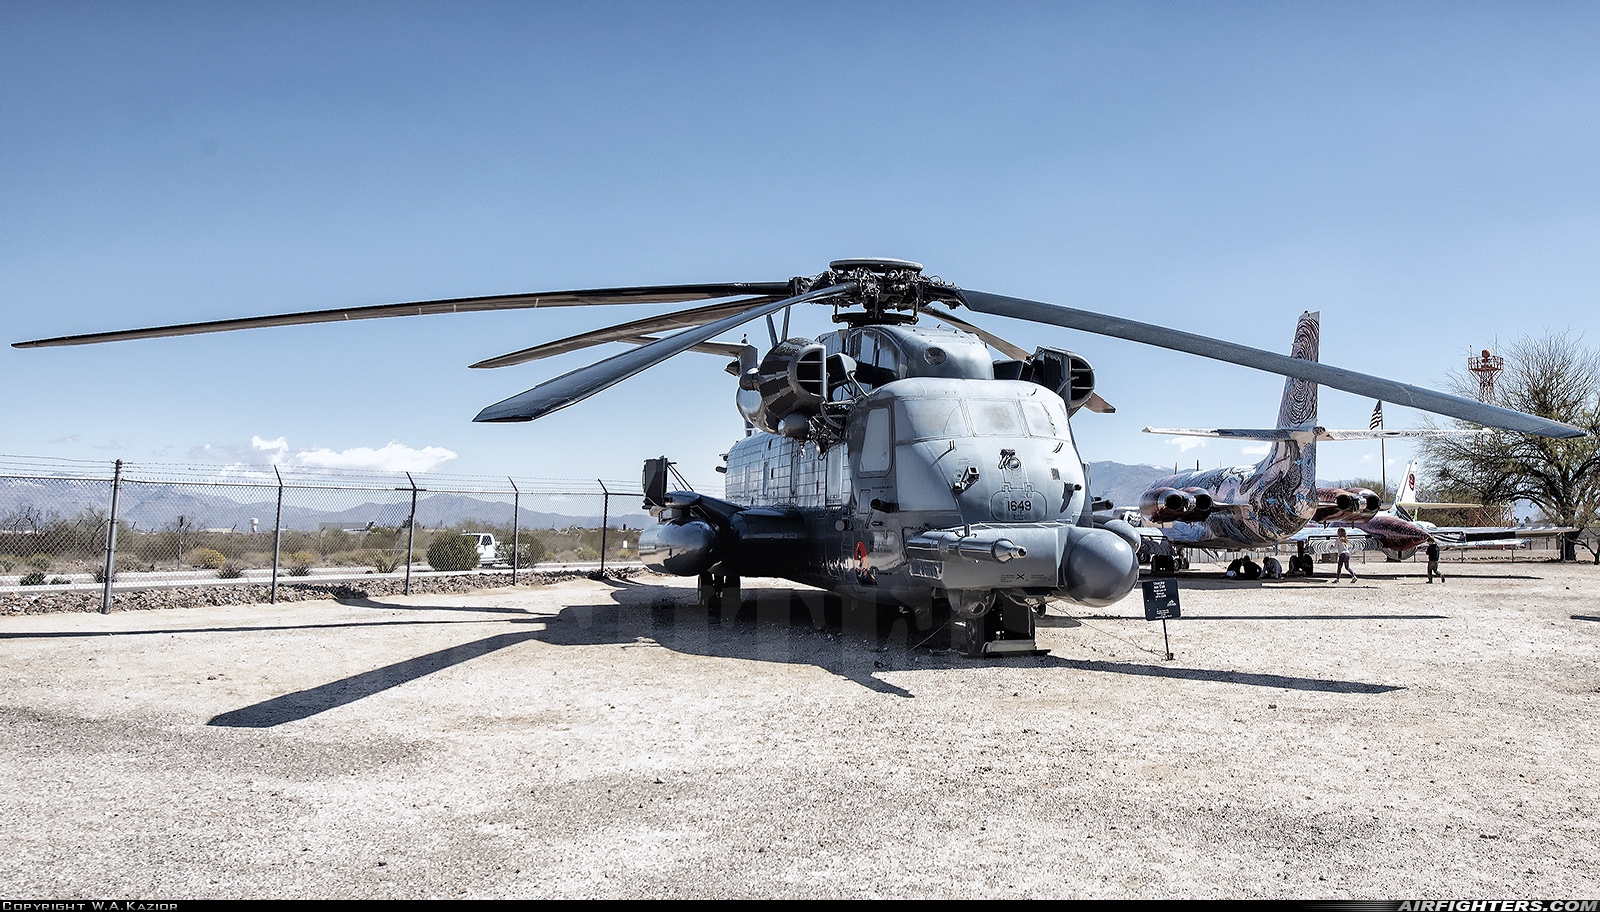 USA - Air Force Sikorsky MH-53M Pave Low IV (S-65) 73-1649 at Tucson - Pima Air and Space Museum, USA